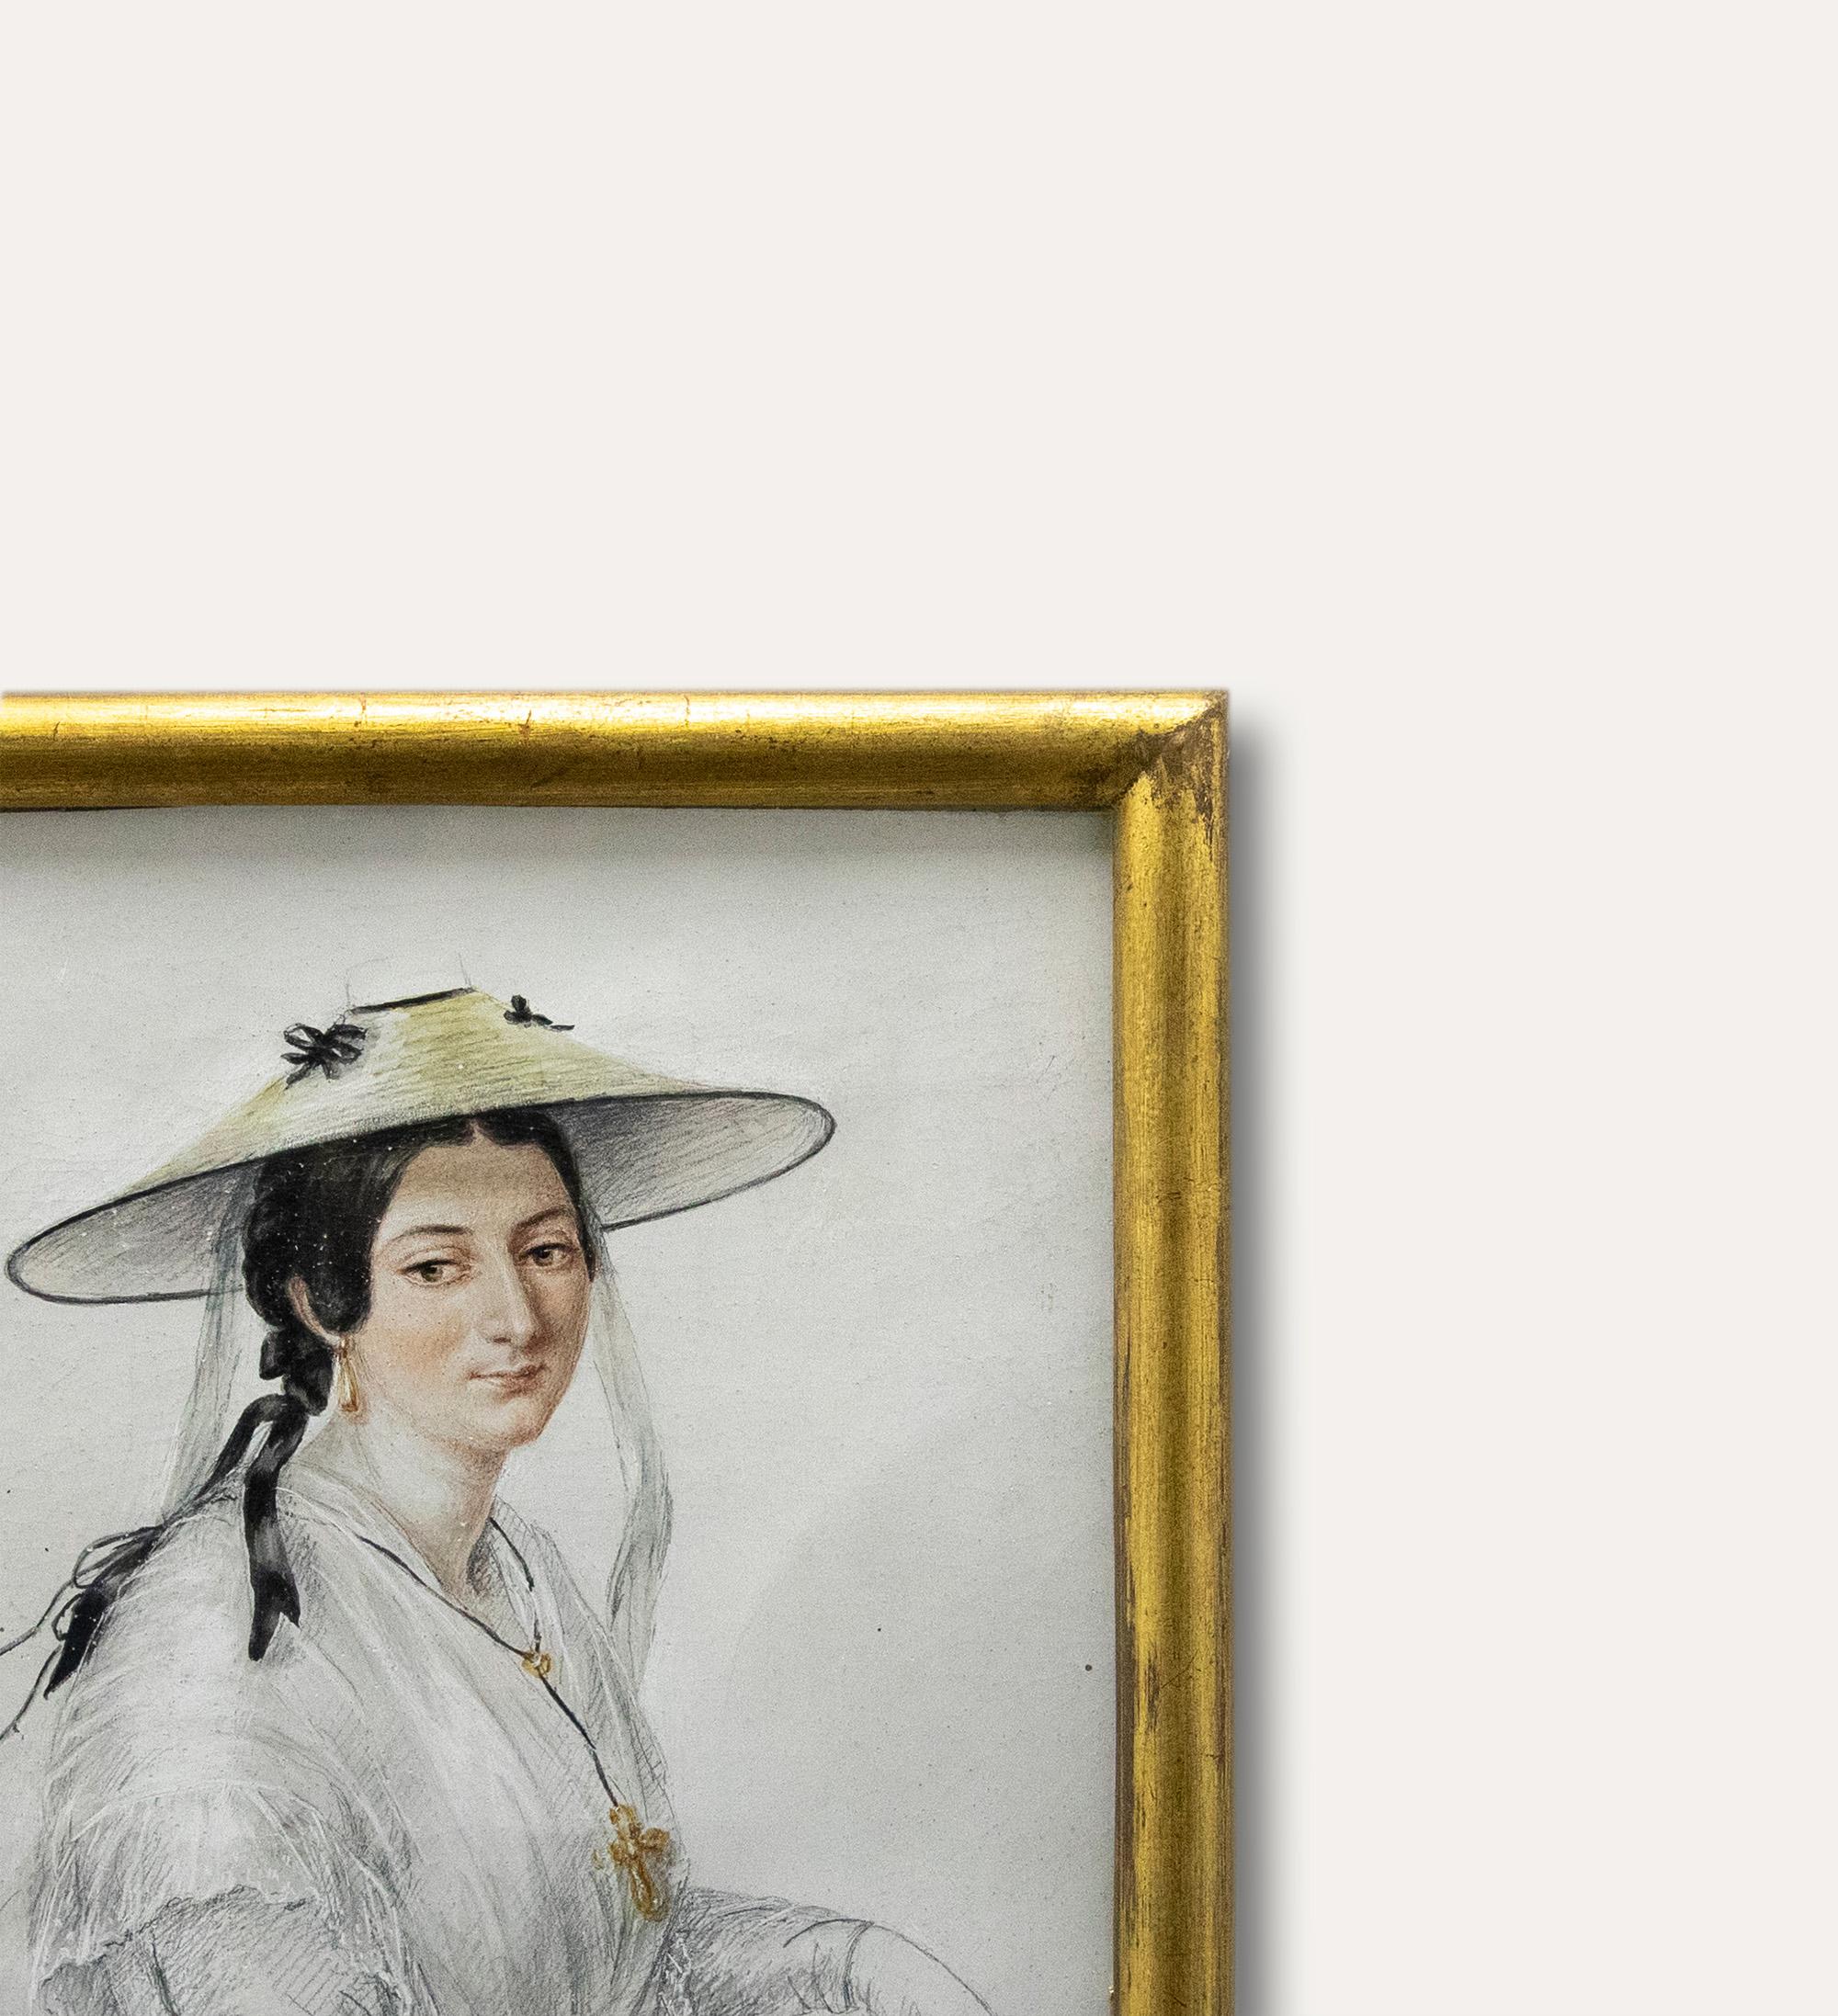 A delightful portrait study depicting a woman dressed in white lace. She wears a bonnet with black trimmings to match the ribbon in her hair and rests her arm over a basket of flowers. Delicately captures in intricate watercolour and graphite